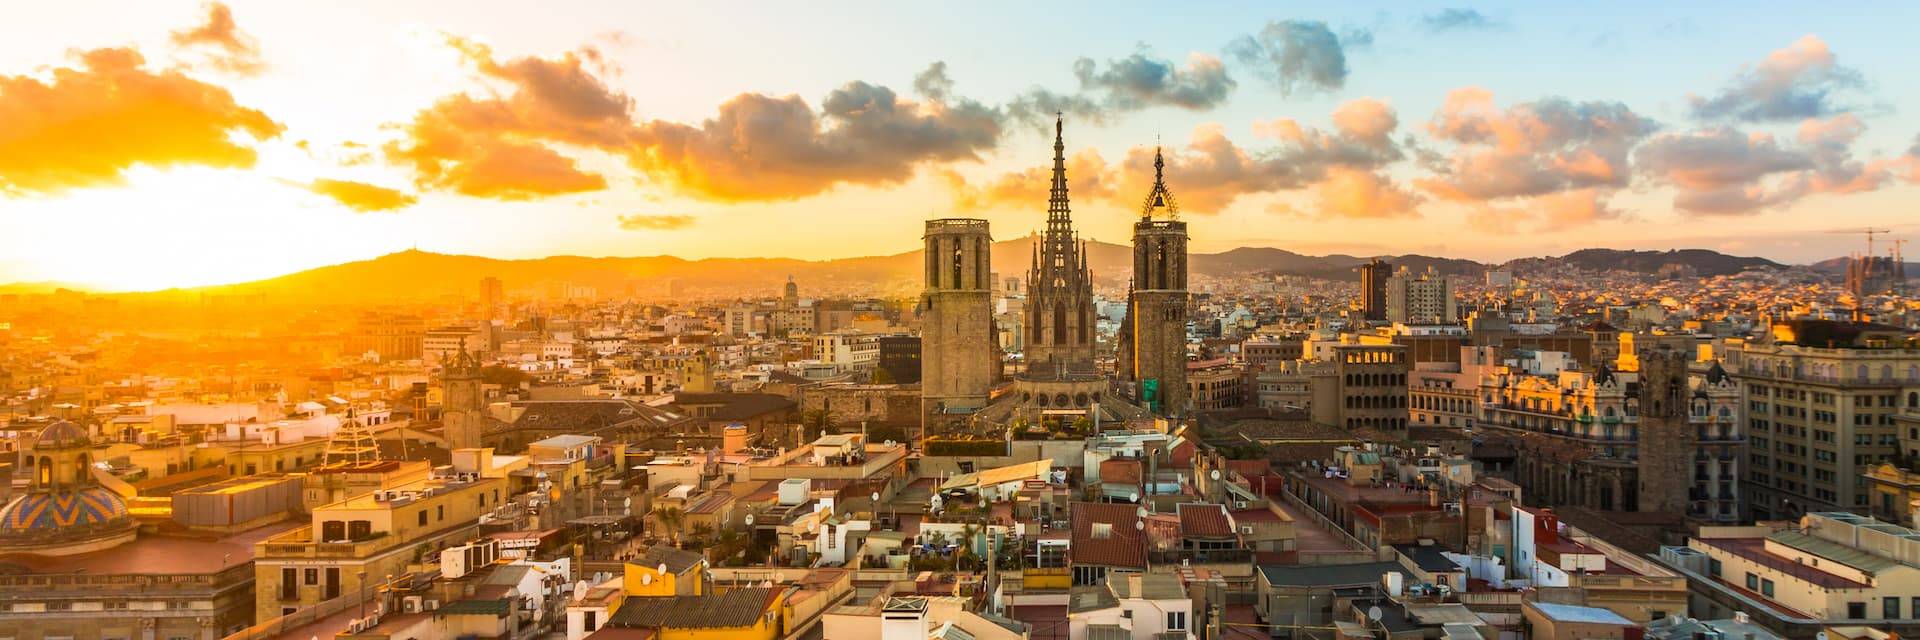 Barcelona "All in One" Free Walking Tour